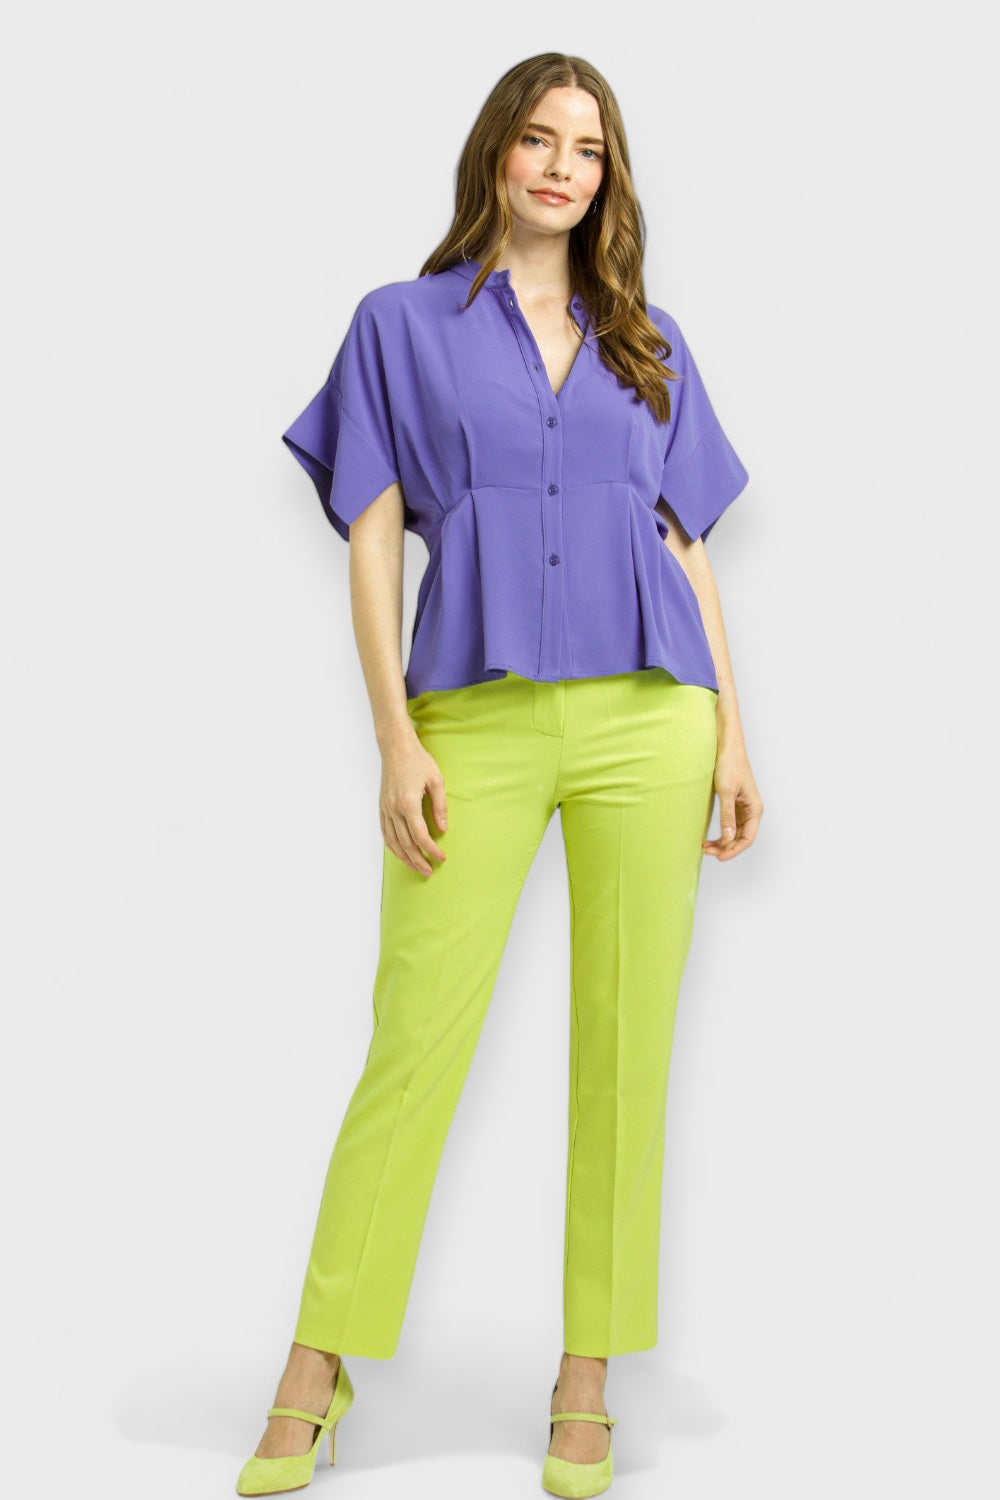 Lilac Short Sleeves Peplum Blouse Top by Enhle Italian Women's Clothing Paired with Victoria Lime Green Pants